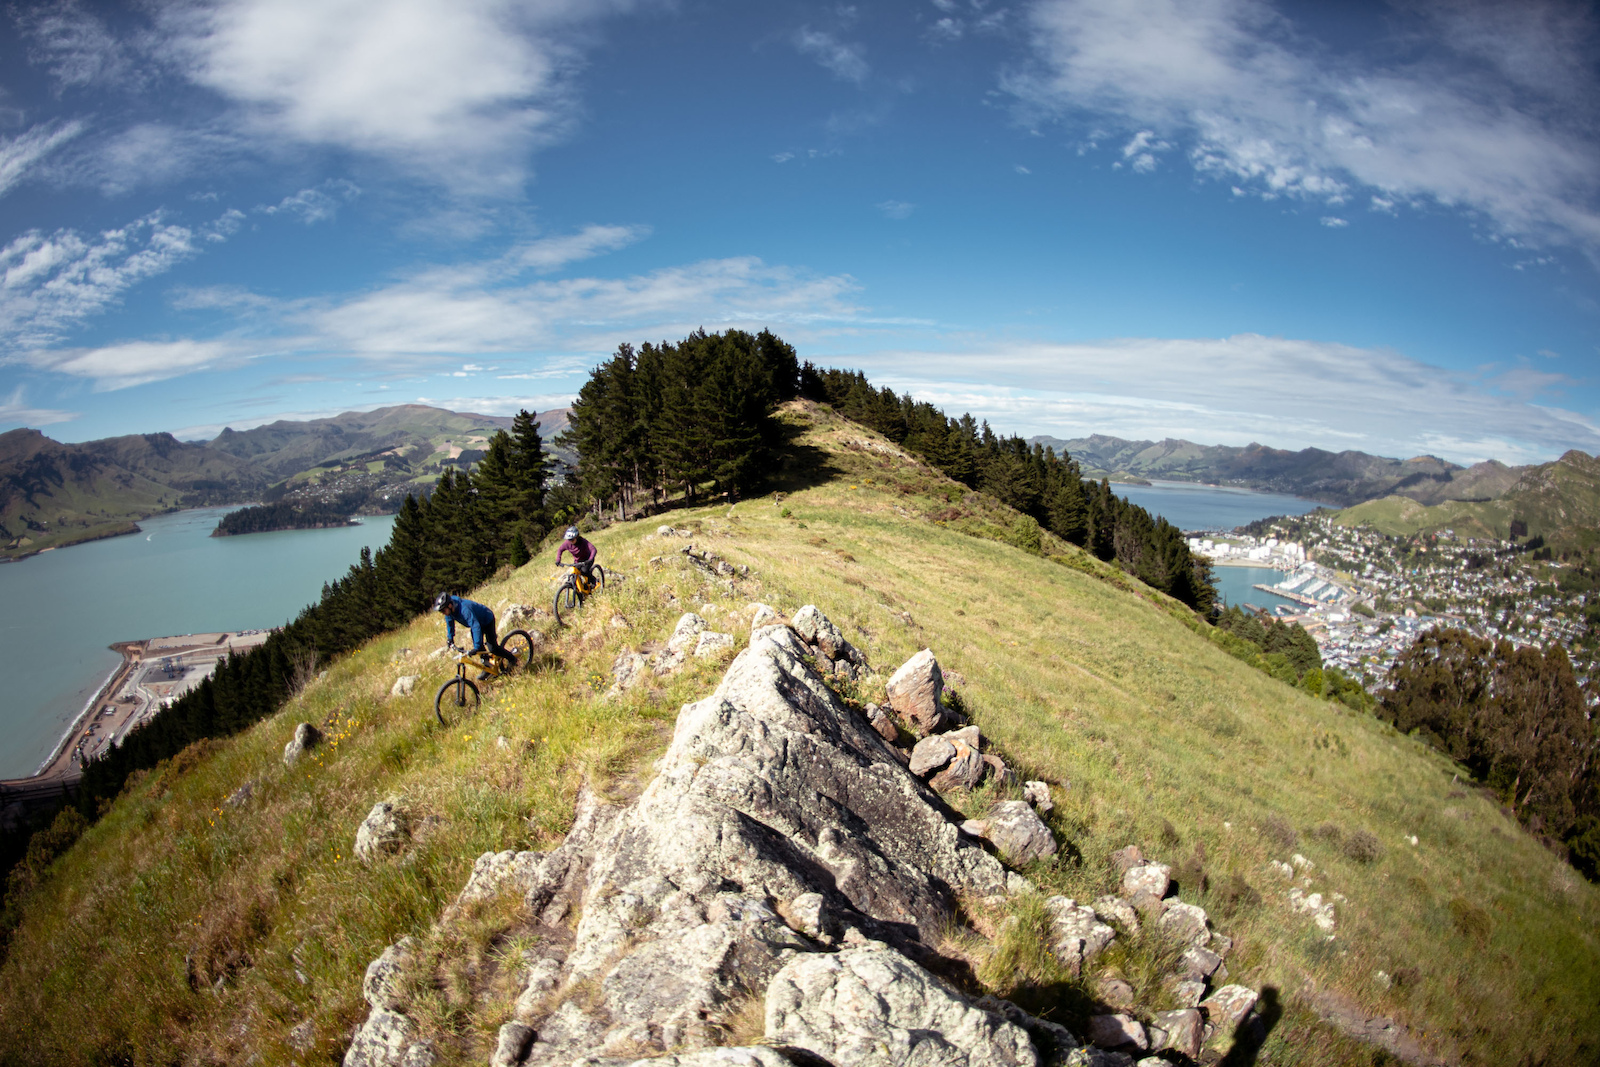 The top of Lyttleton trails where you can see into Lyttleton township and the harbour.